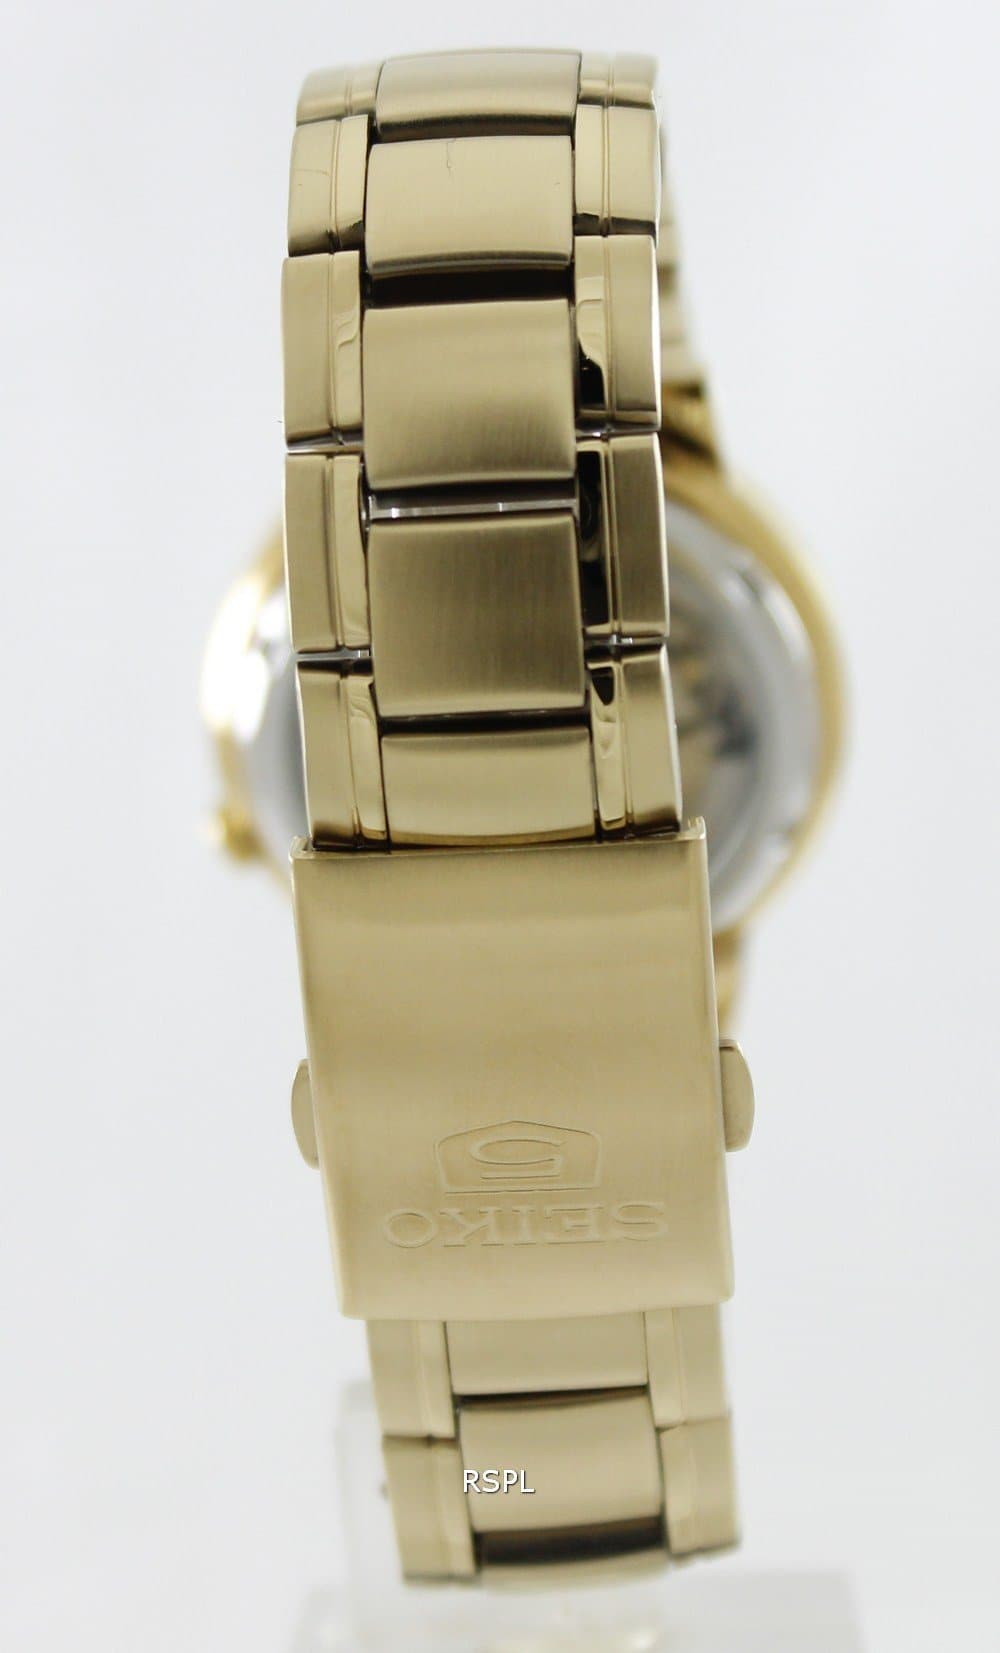 Seiko 5 Classic Mens Size Gold Dial & Plated Stainless Steel Strap Watch SNKA10K1 - Diligence1International